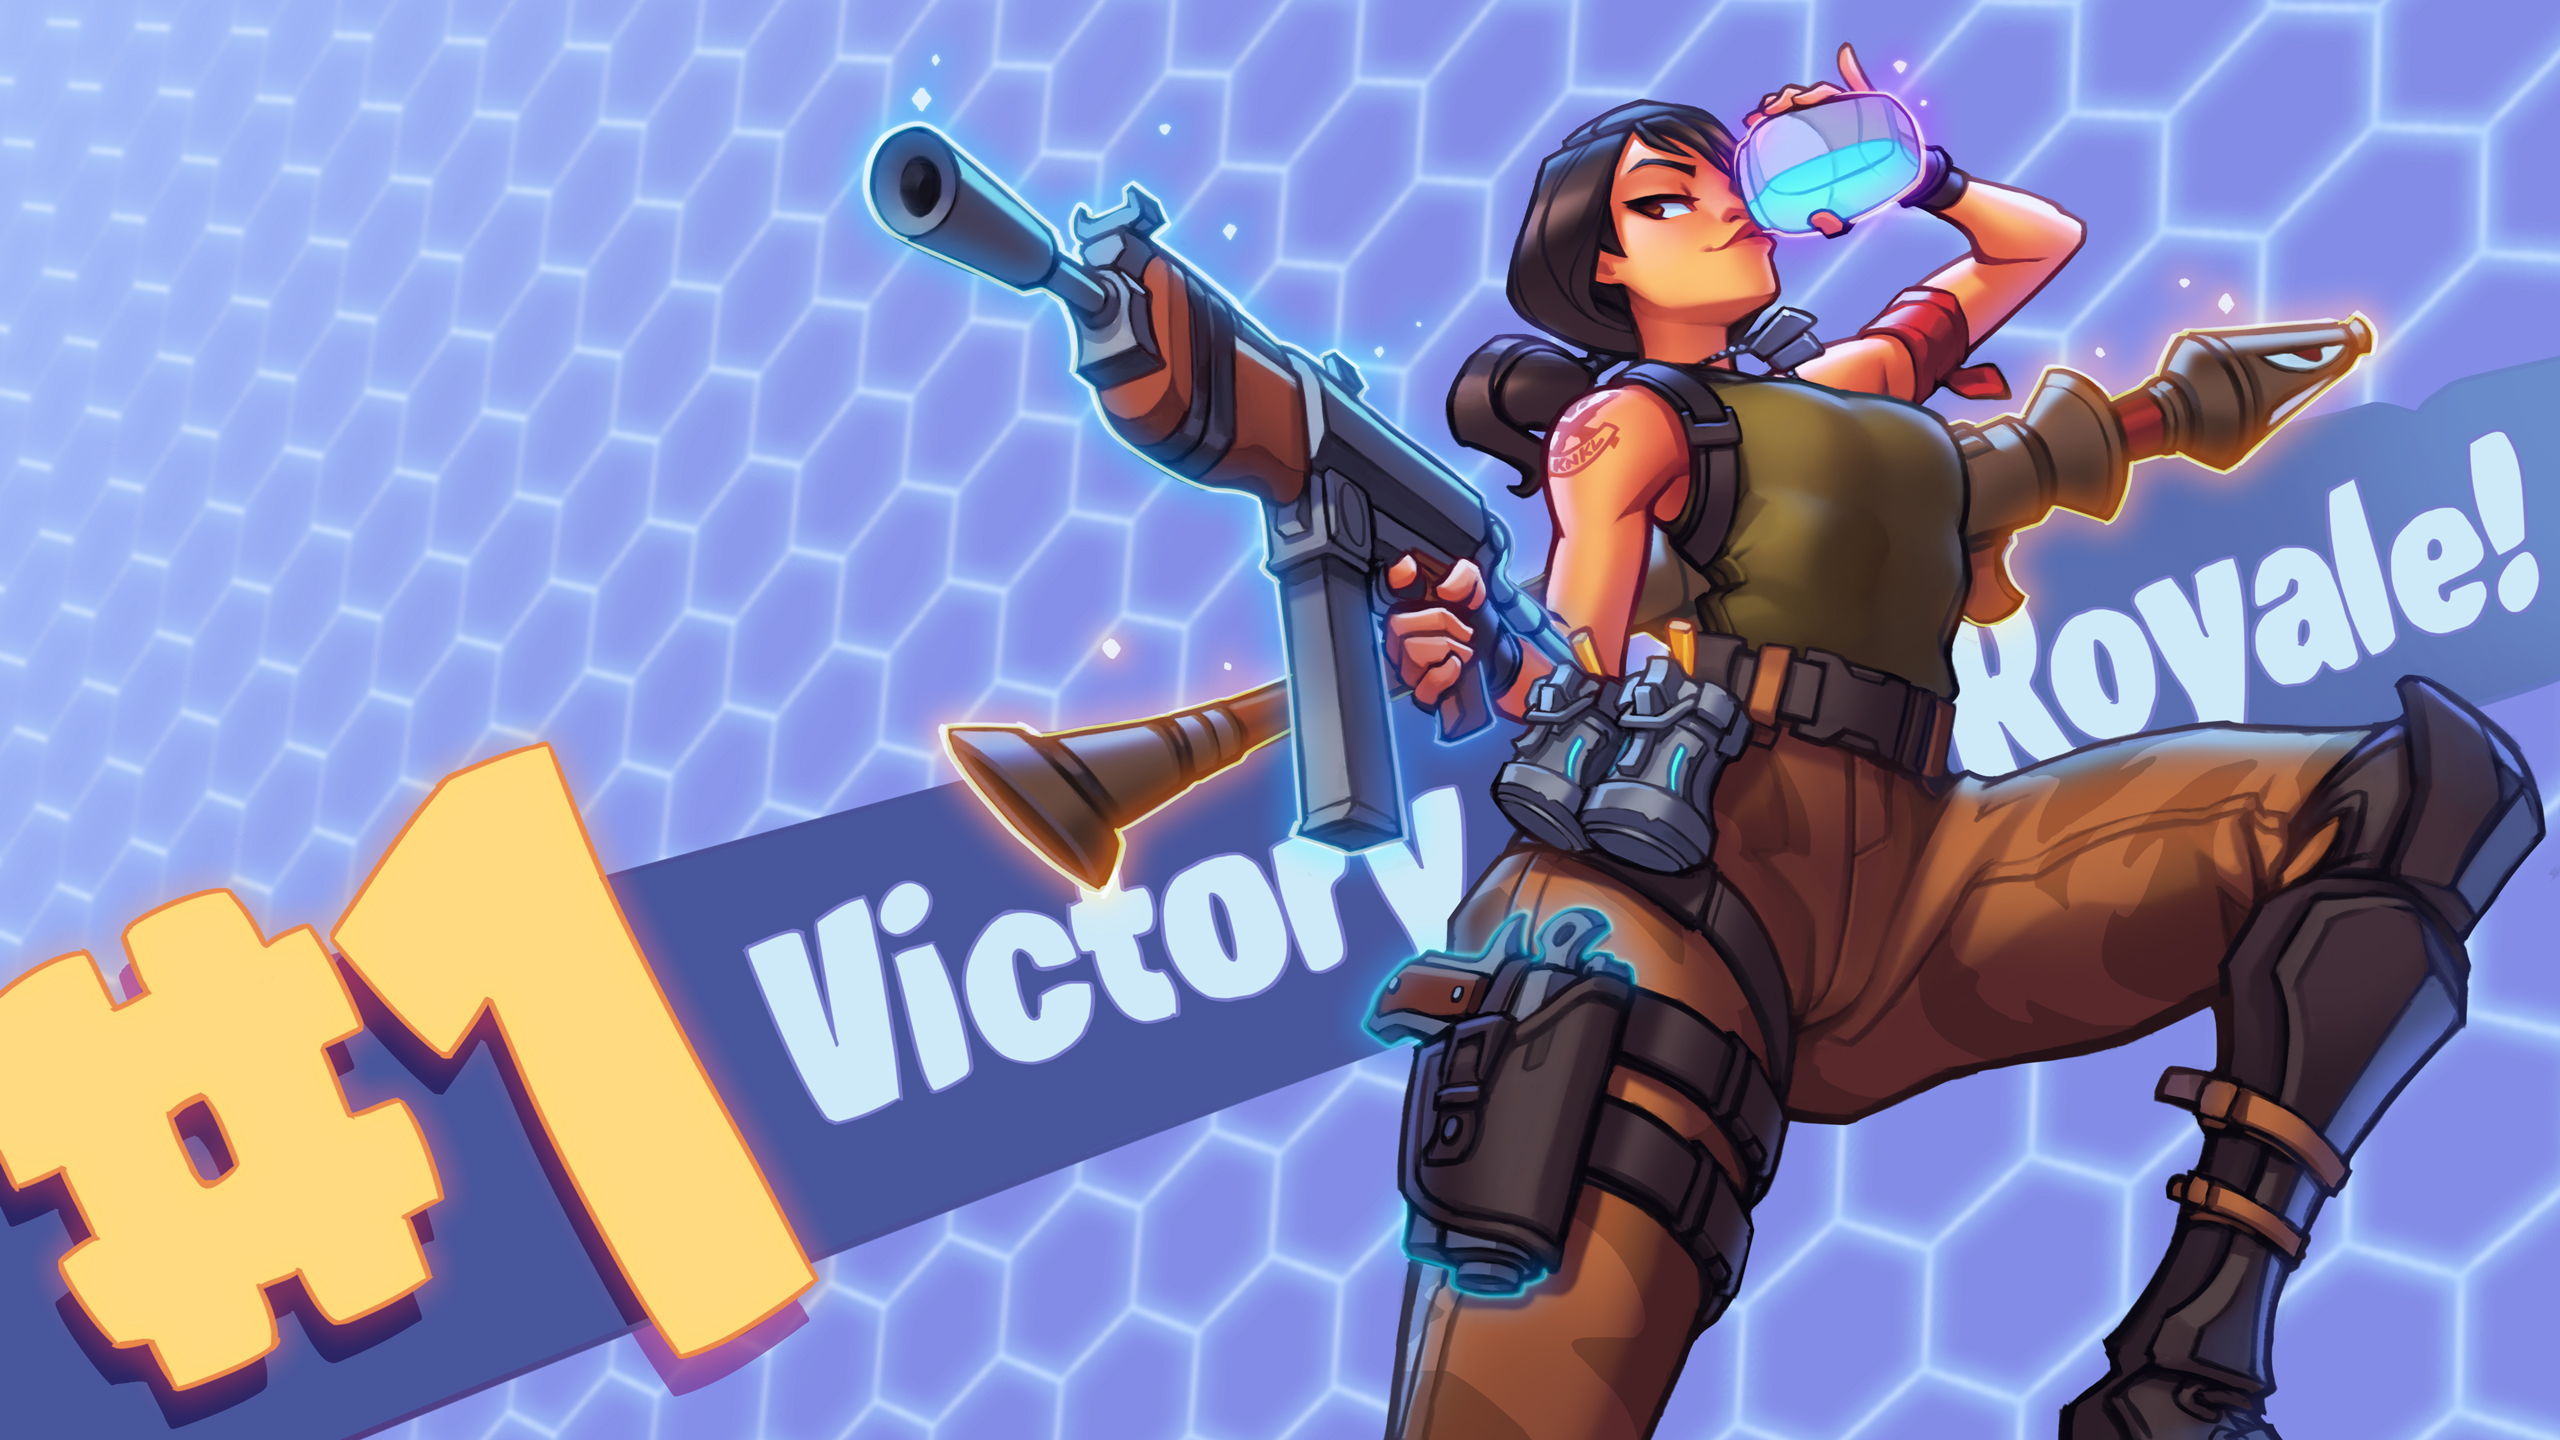 Fortnite 2018 Victory Royale Youtube By Knkl On Deviantart - fortnite 2018 victory royale youtube by knkl